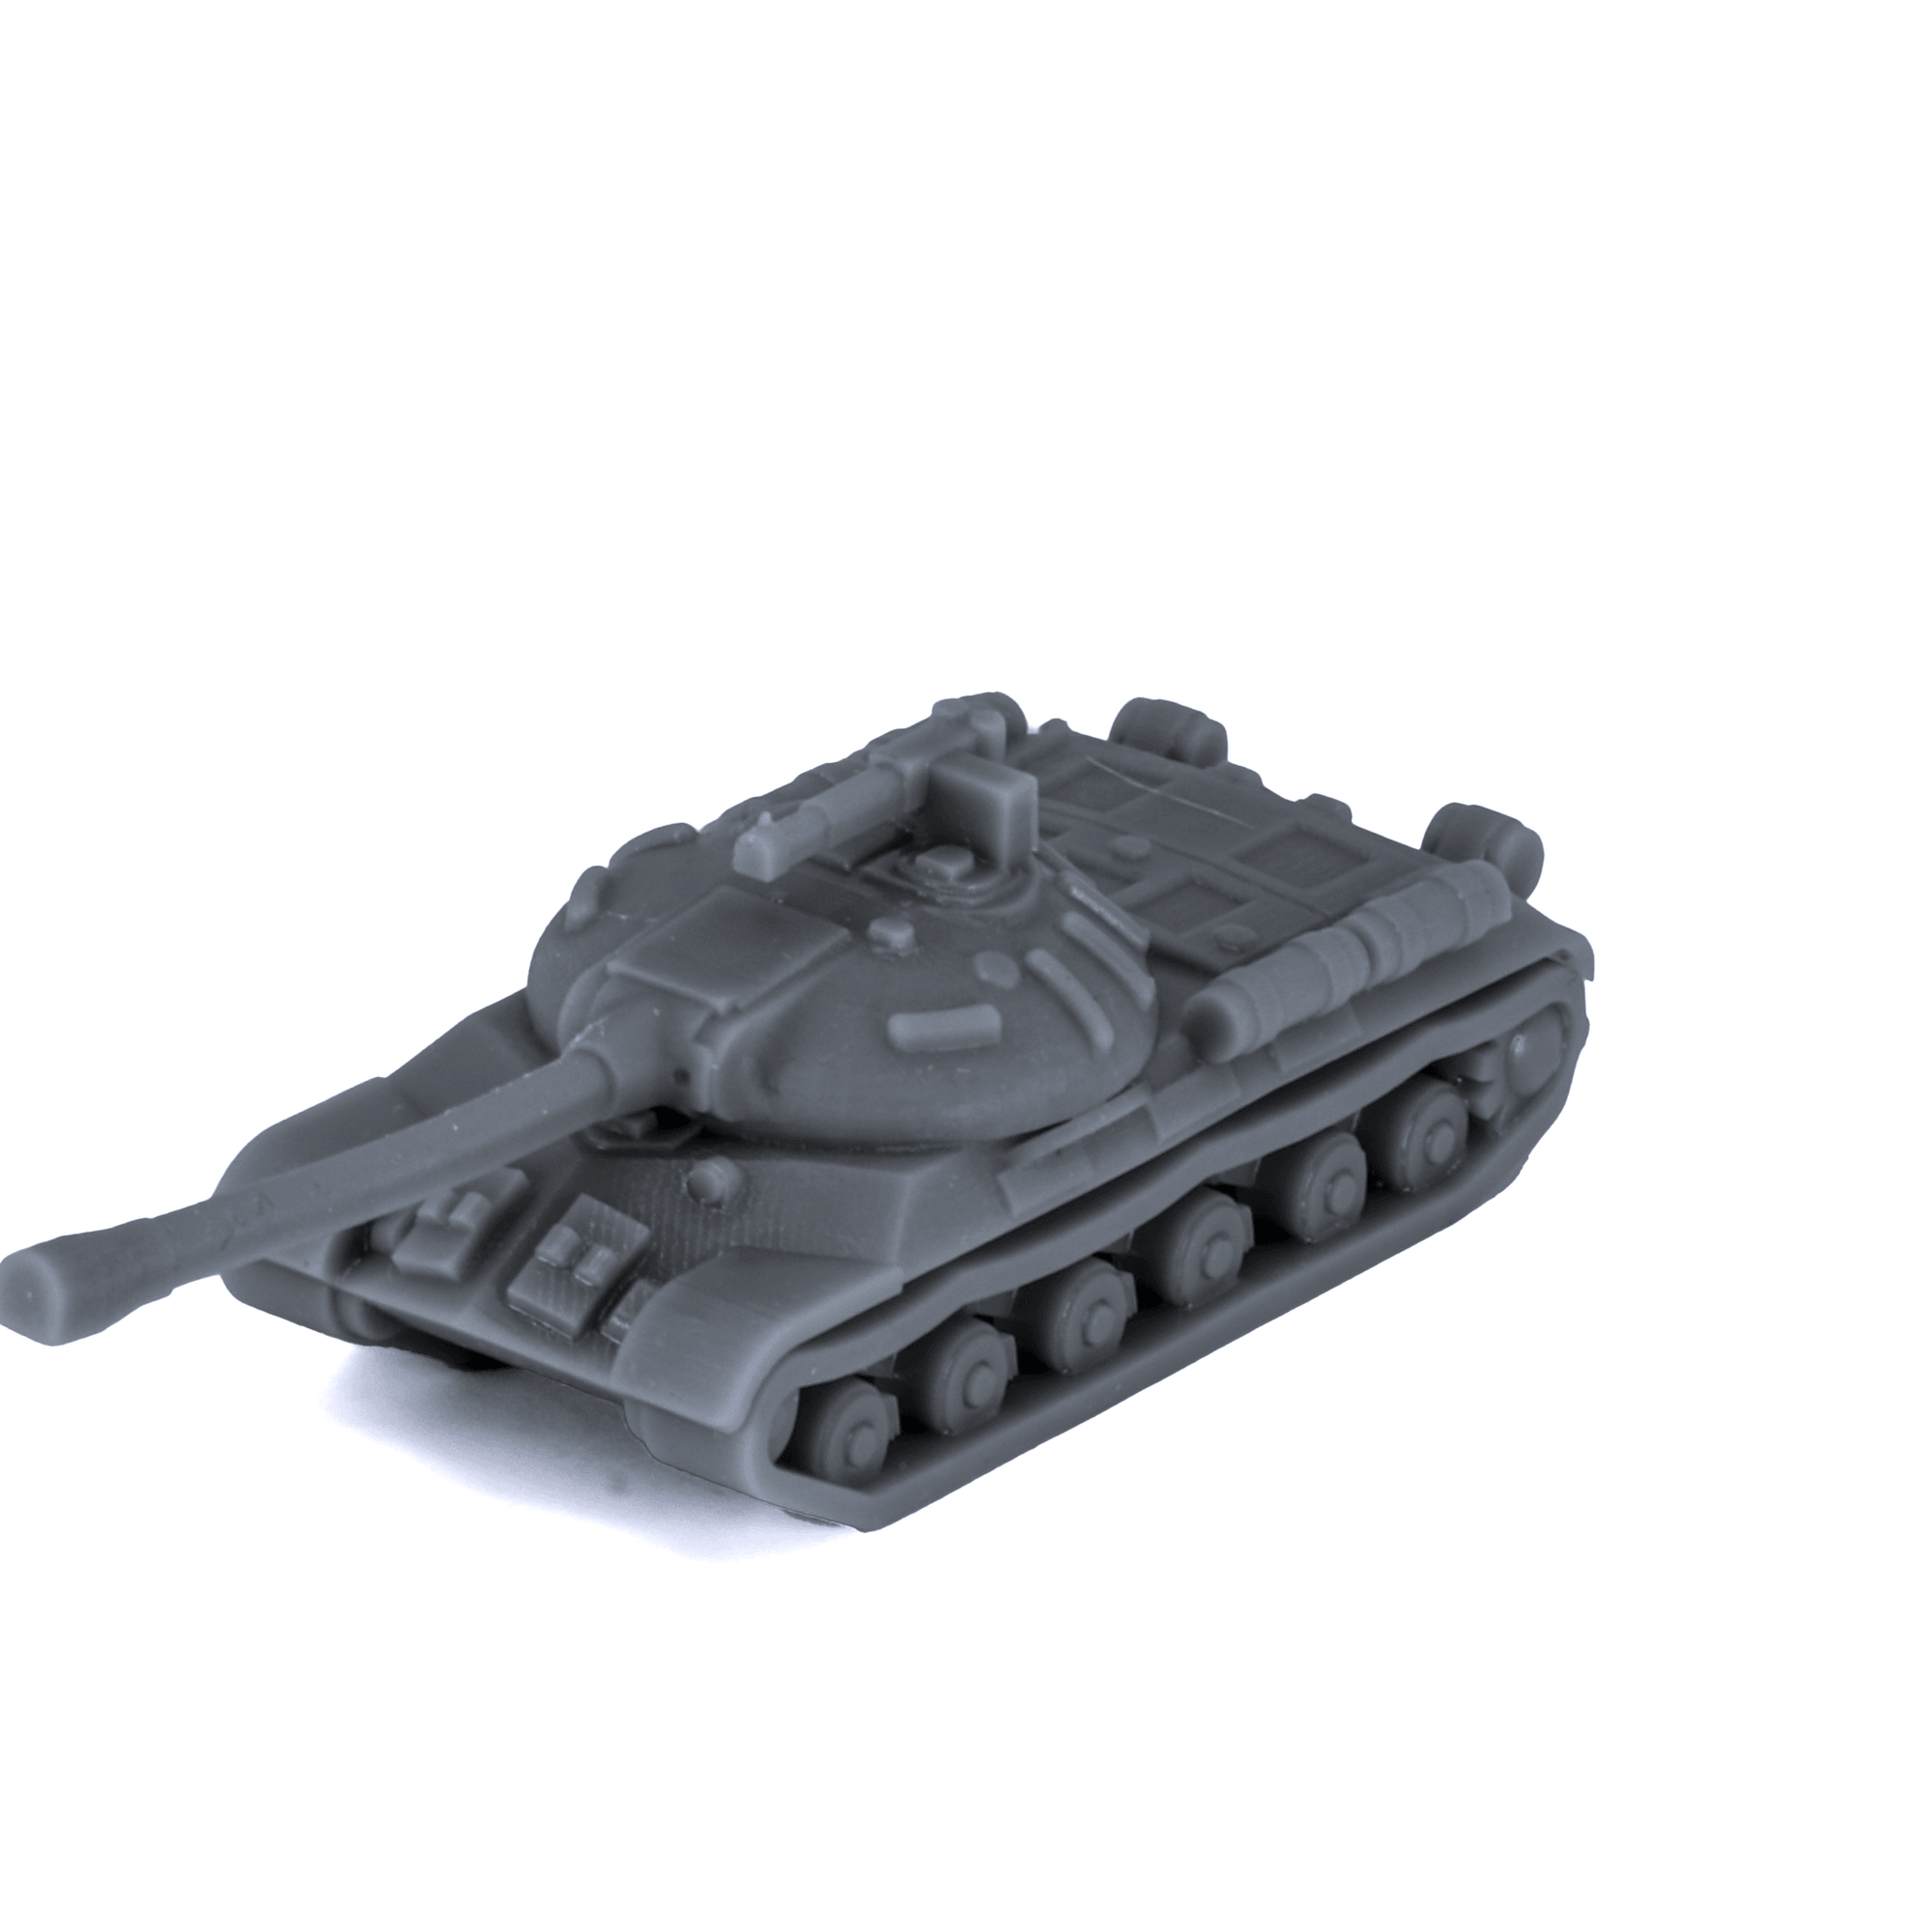 IS-3 with MG - Alternate Ending Games - axis-and-allies